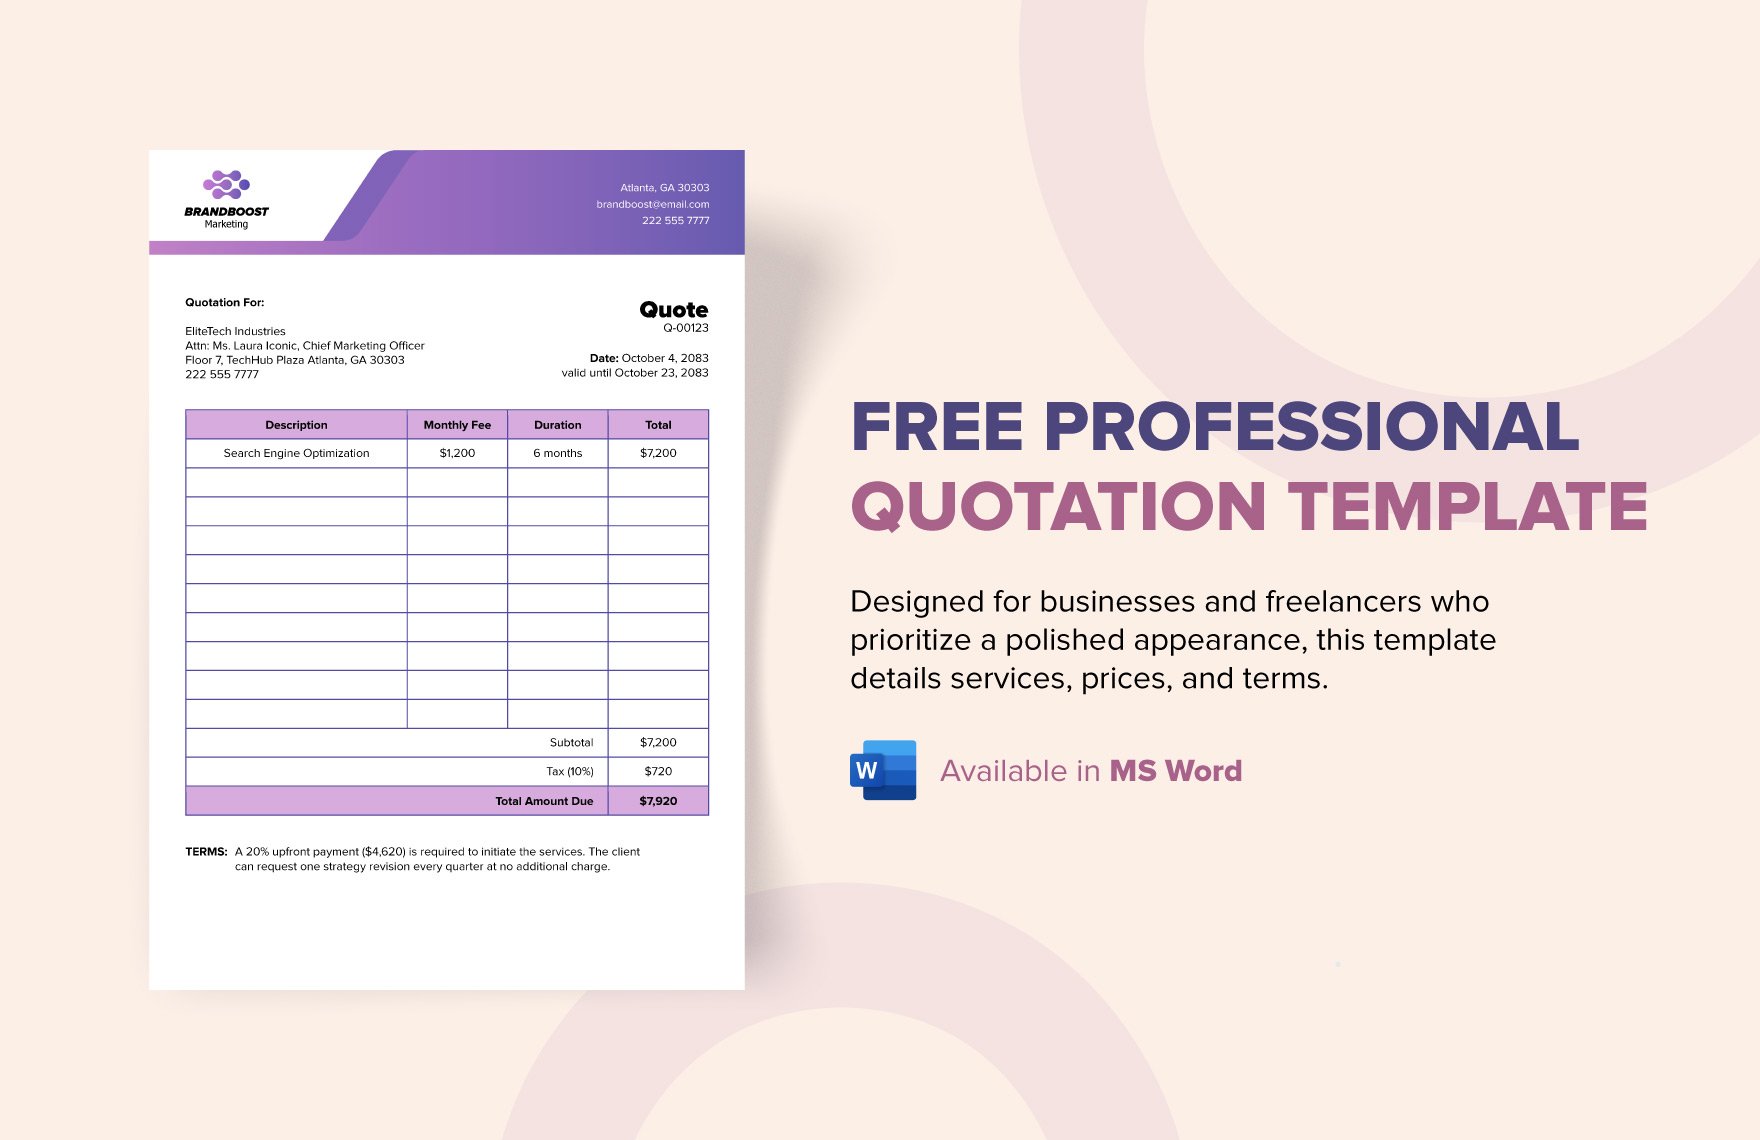 Free Professional Quotation Template